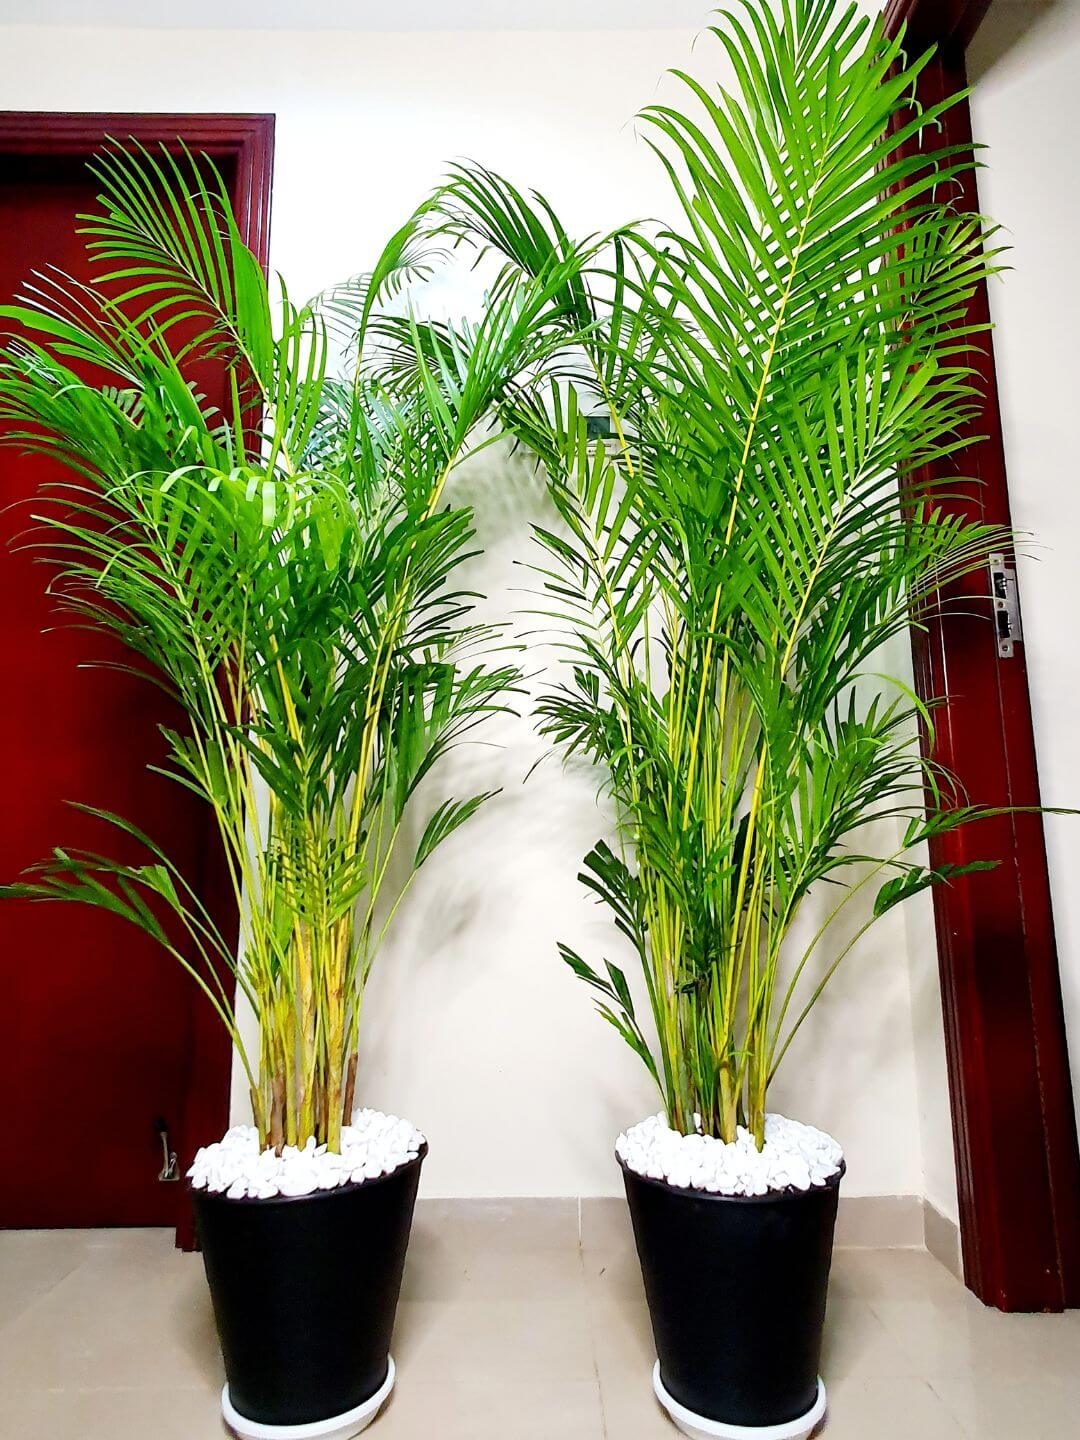 Potted Large Areca Palms 130-140 cm Planted in White Flexible Pot